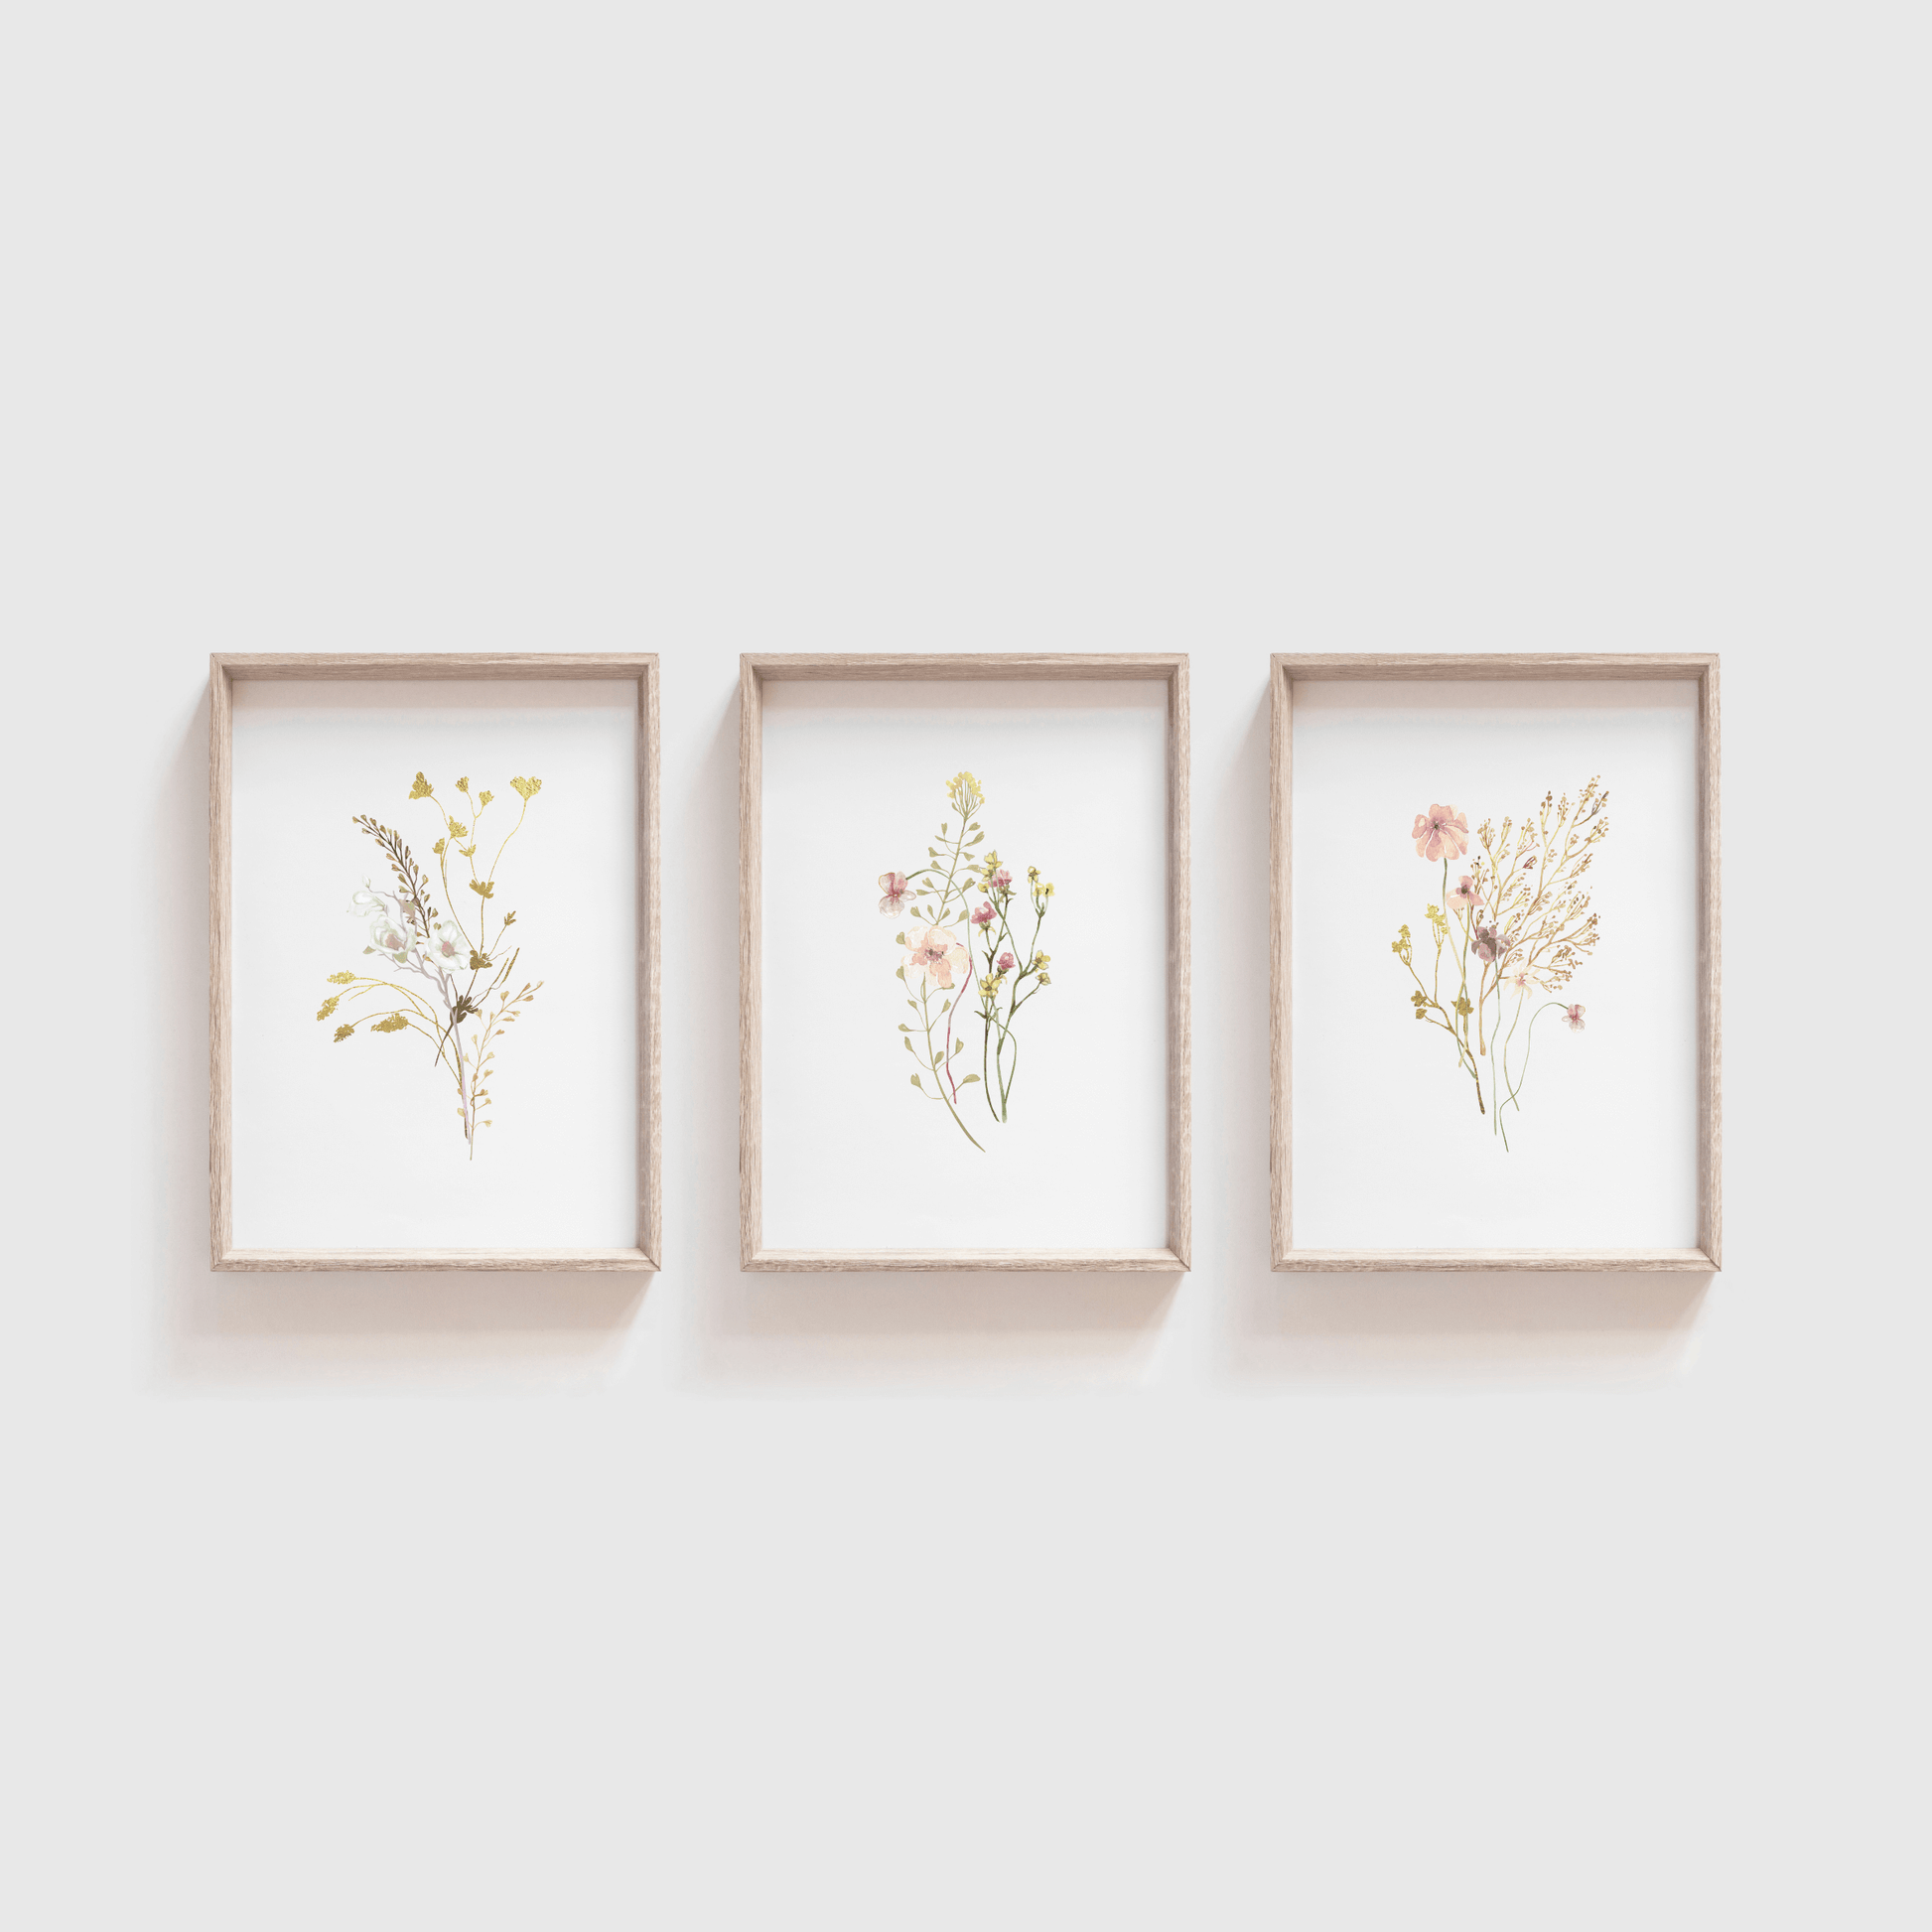 Pink and Yellow flower wall art with a vintage style and a country farmhouse look. A set of 3 designs for a kitchen bedroom, nursery, or living room.